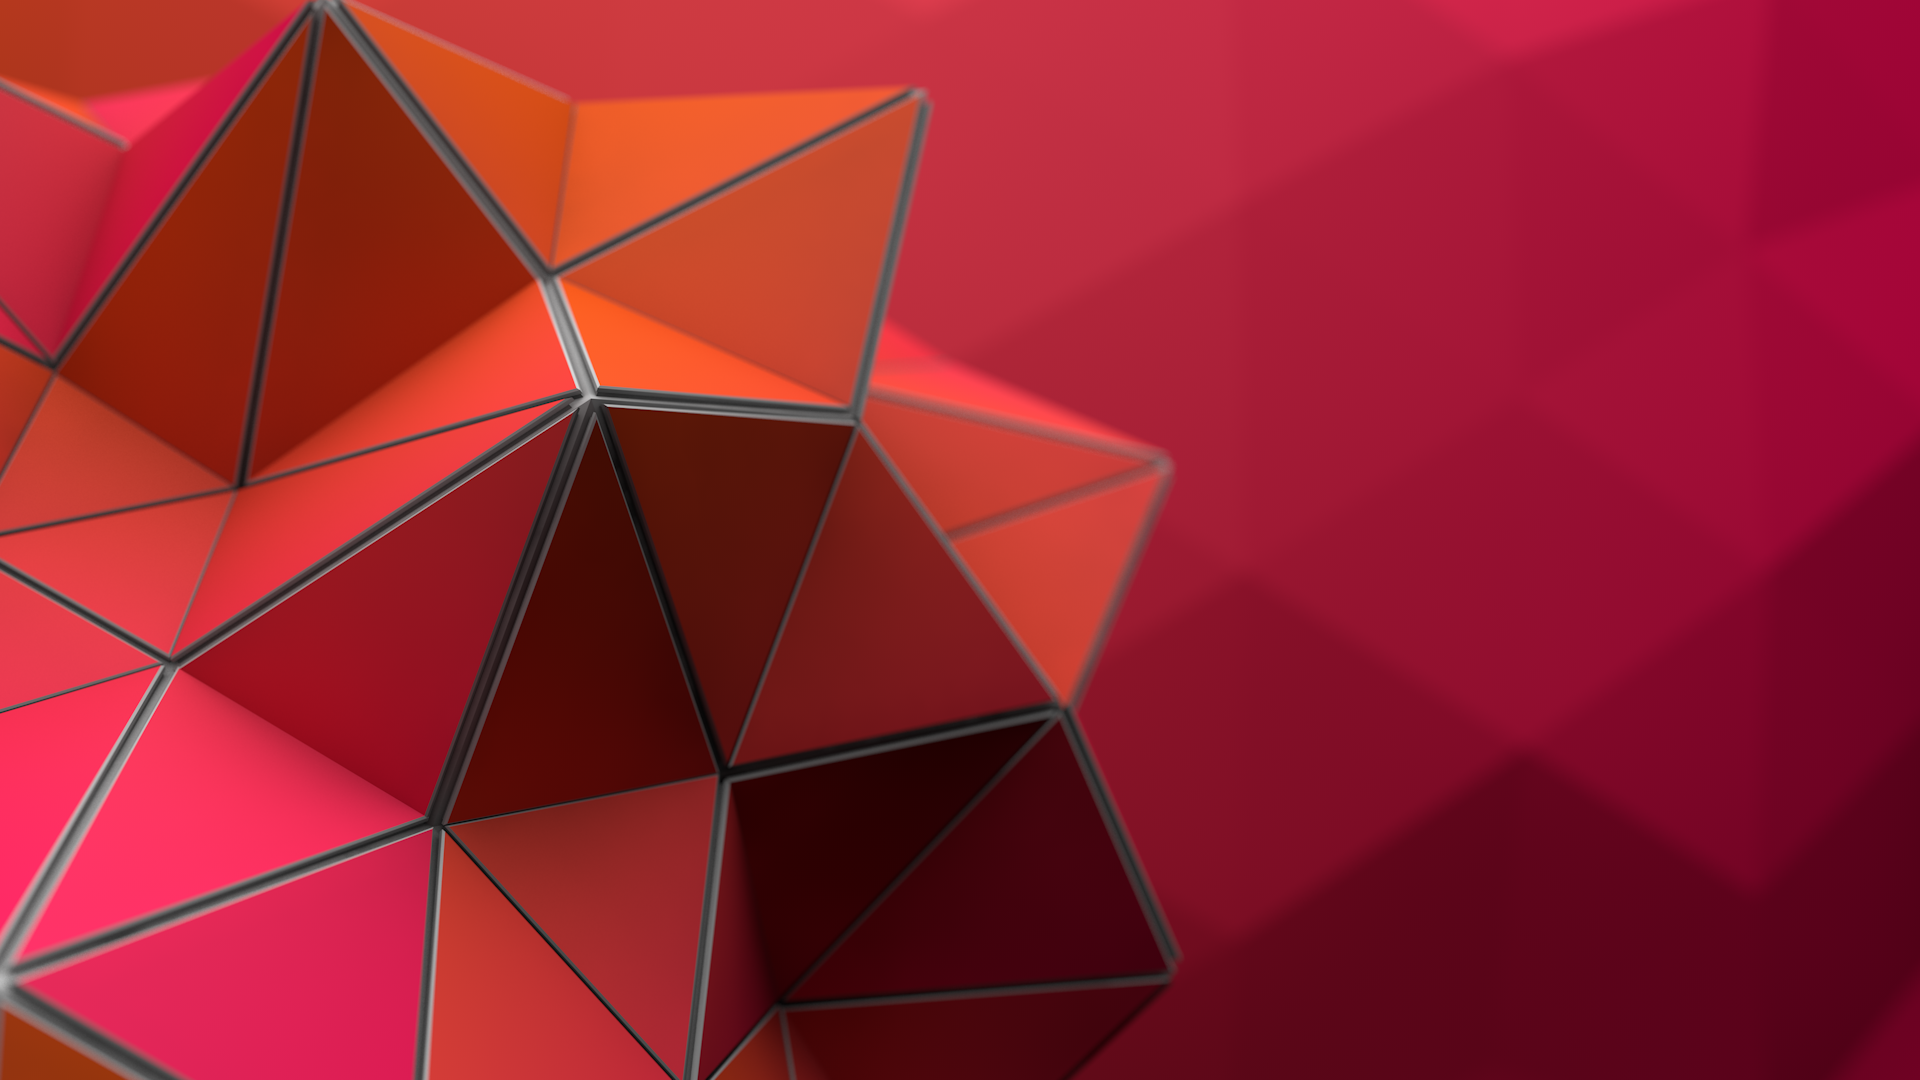 General 1920x1080 geometry abstract low poly DeviantArt geometric figures red background digital art 3D Abstract red